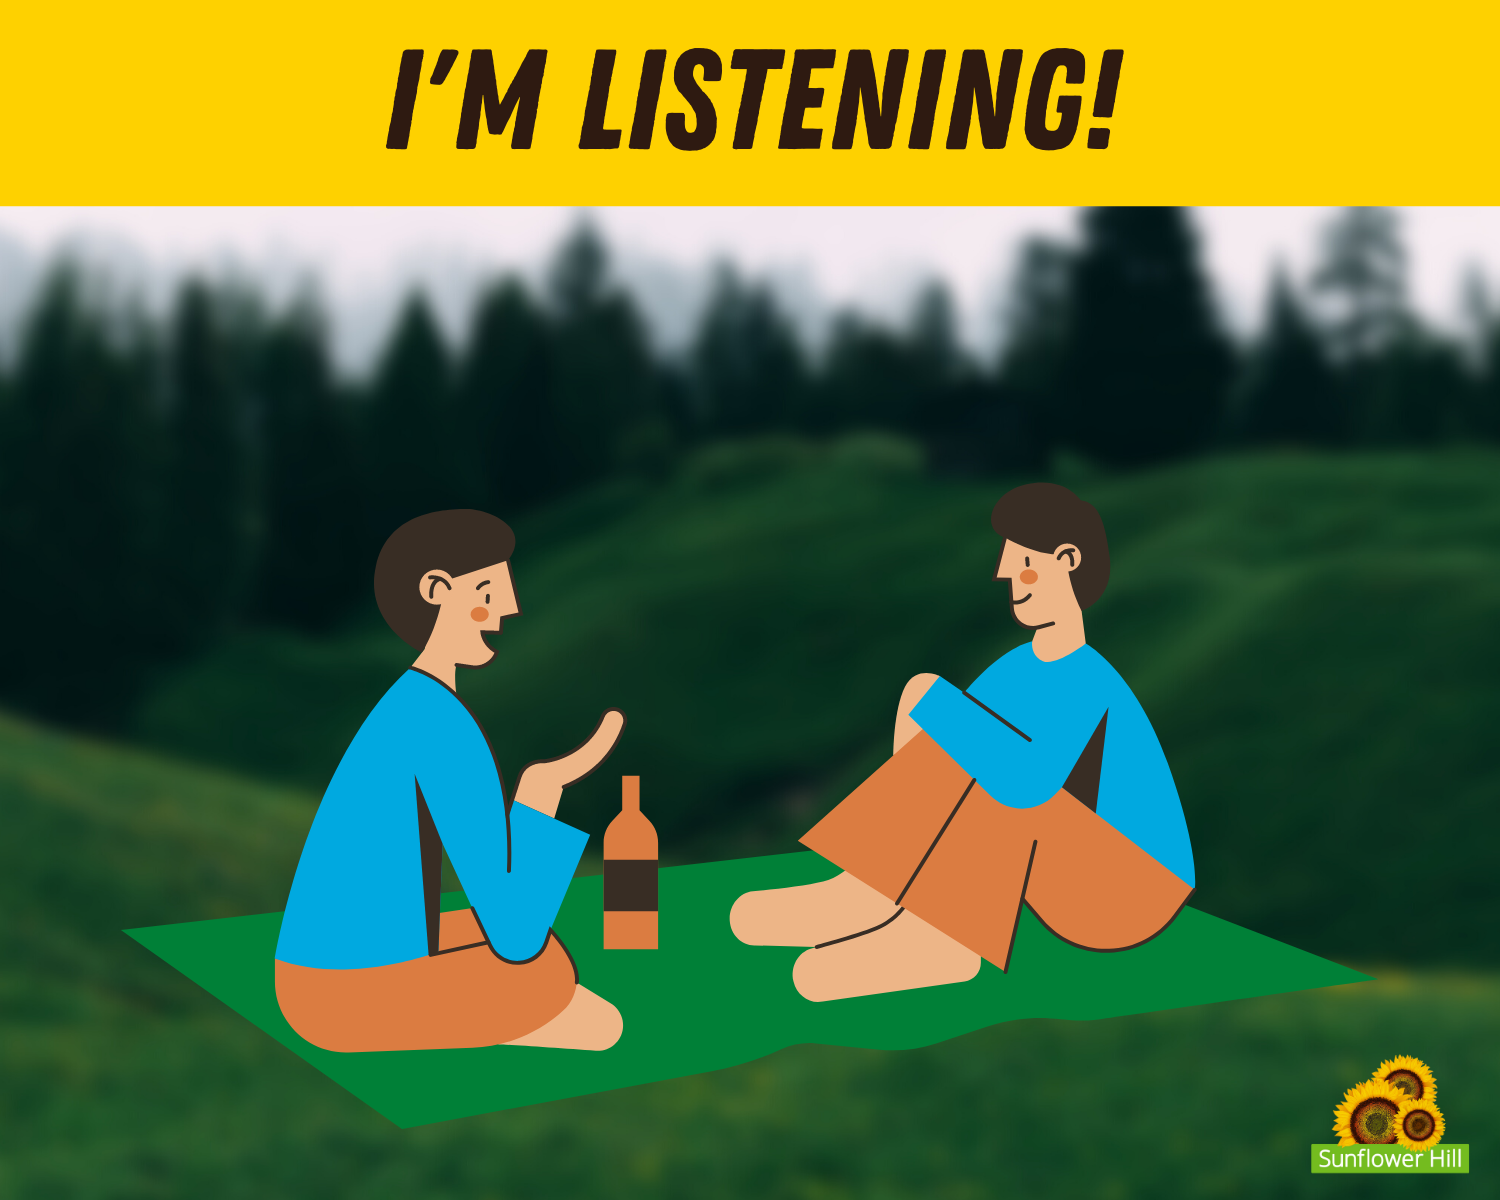 Graphic of two people sitting on picnic blanket with caption: I'm listening